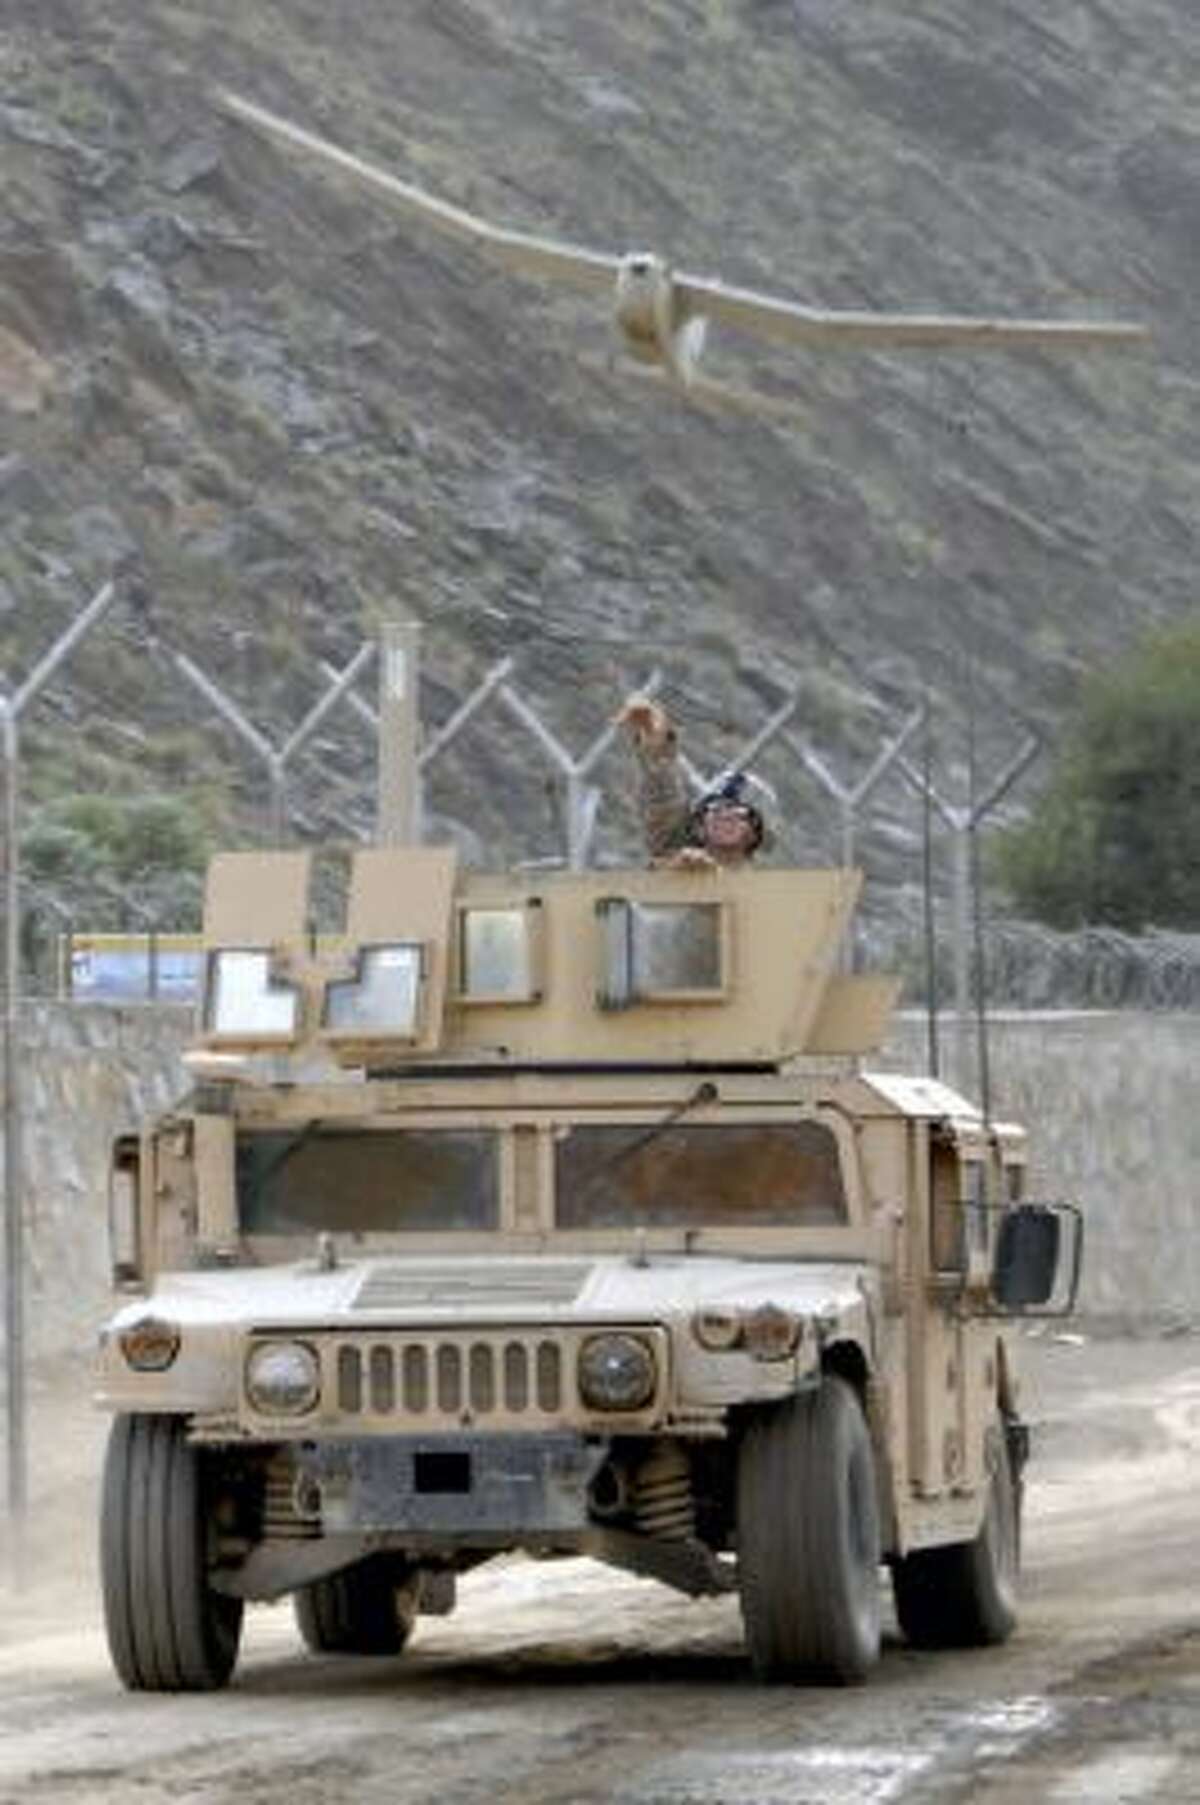 Staff Sergeant Justin McDaniel tosses an Aerovironment Inc. Puma AE unmanned aerial vehicle (UAV) into the air from a moving Humvee during training on the UAV at Forward Operating Base Blessing, Afghanistan, on Oct. 7, 2009. Aerovironment, a maker of small surveillance drones, surprised investors on March 5 by reporting an unprecedented slowdown in military orders.